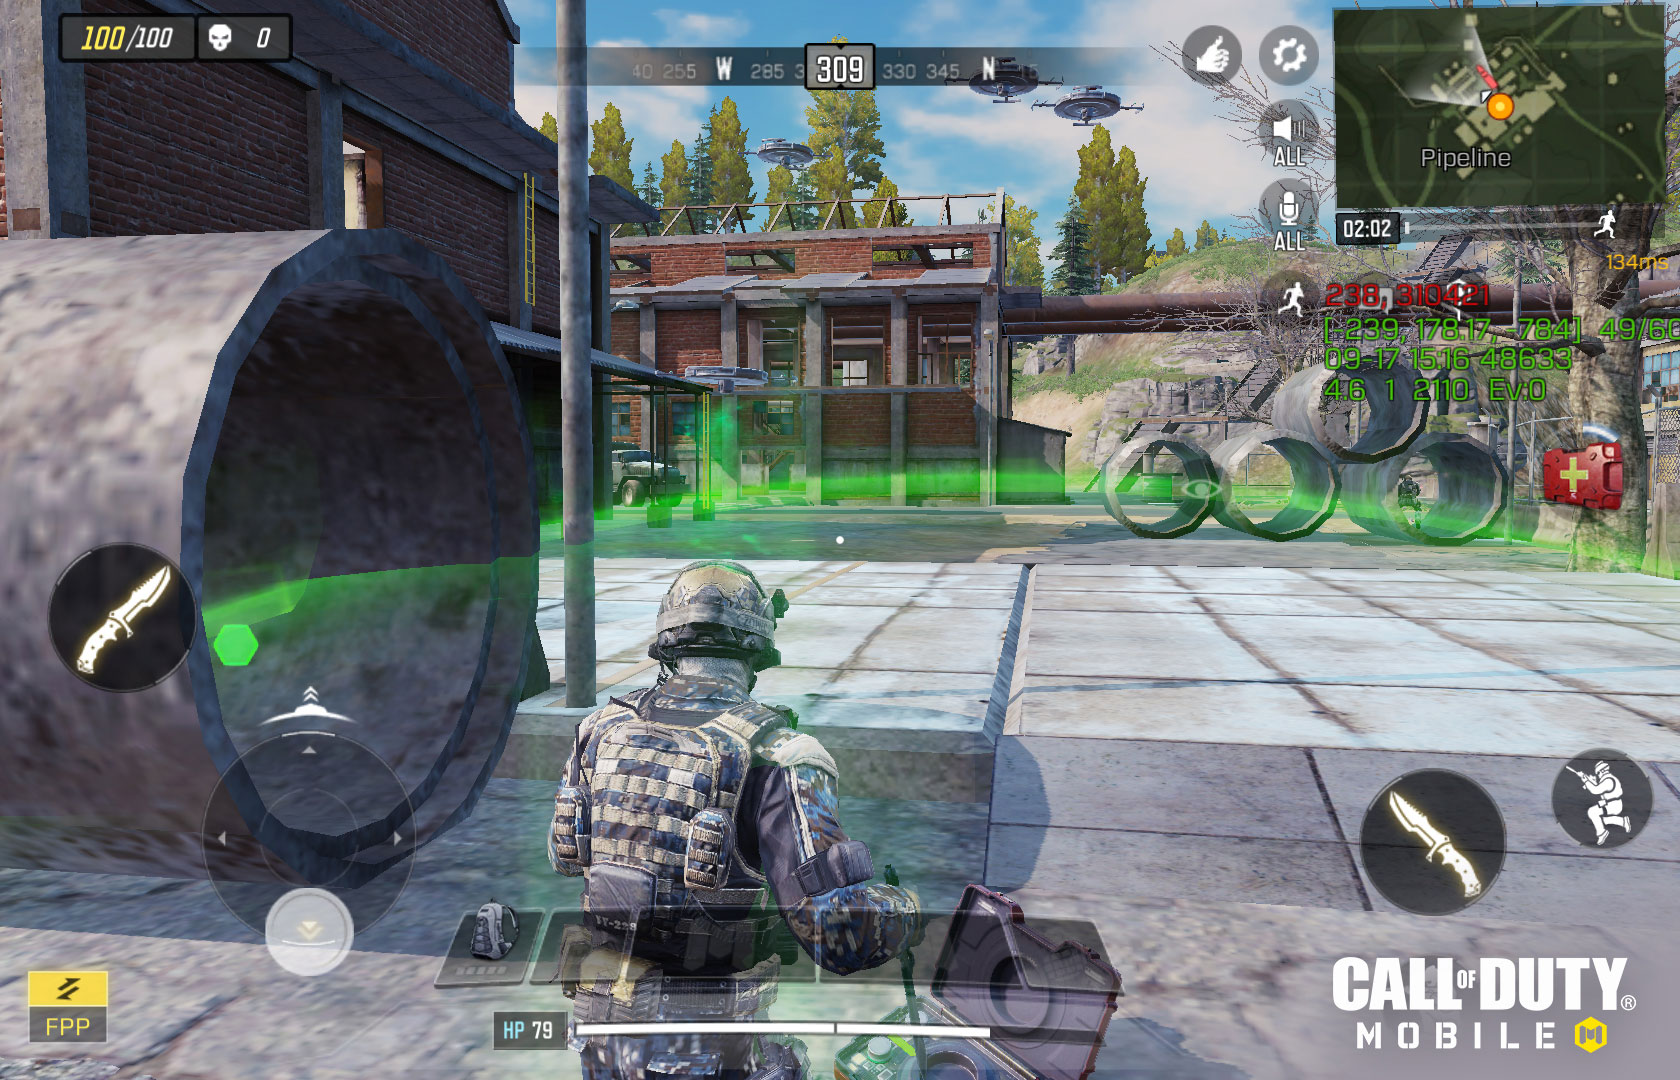 Call of Duty Mobile battle royale gameplay guide : Fly helicopters